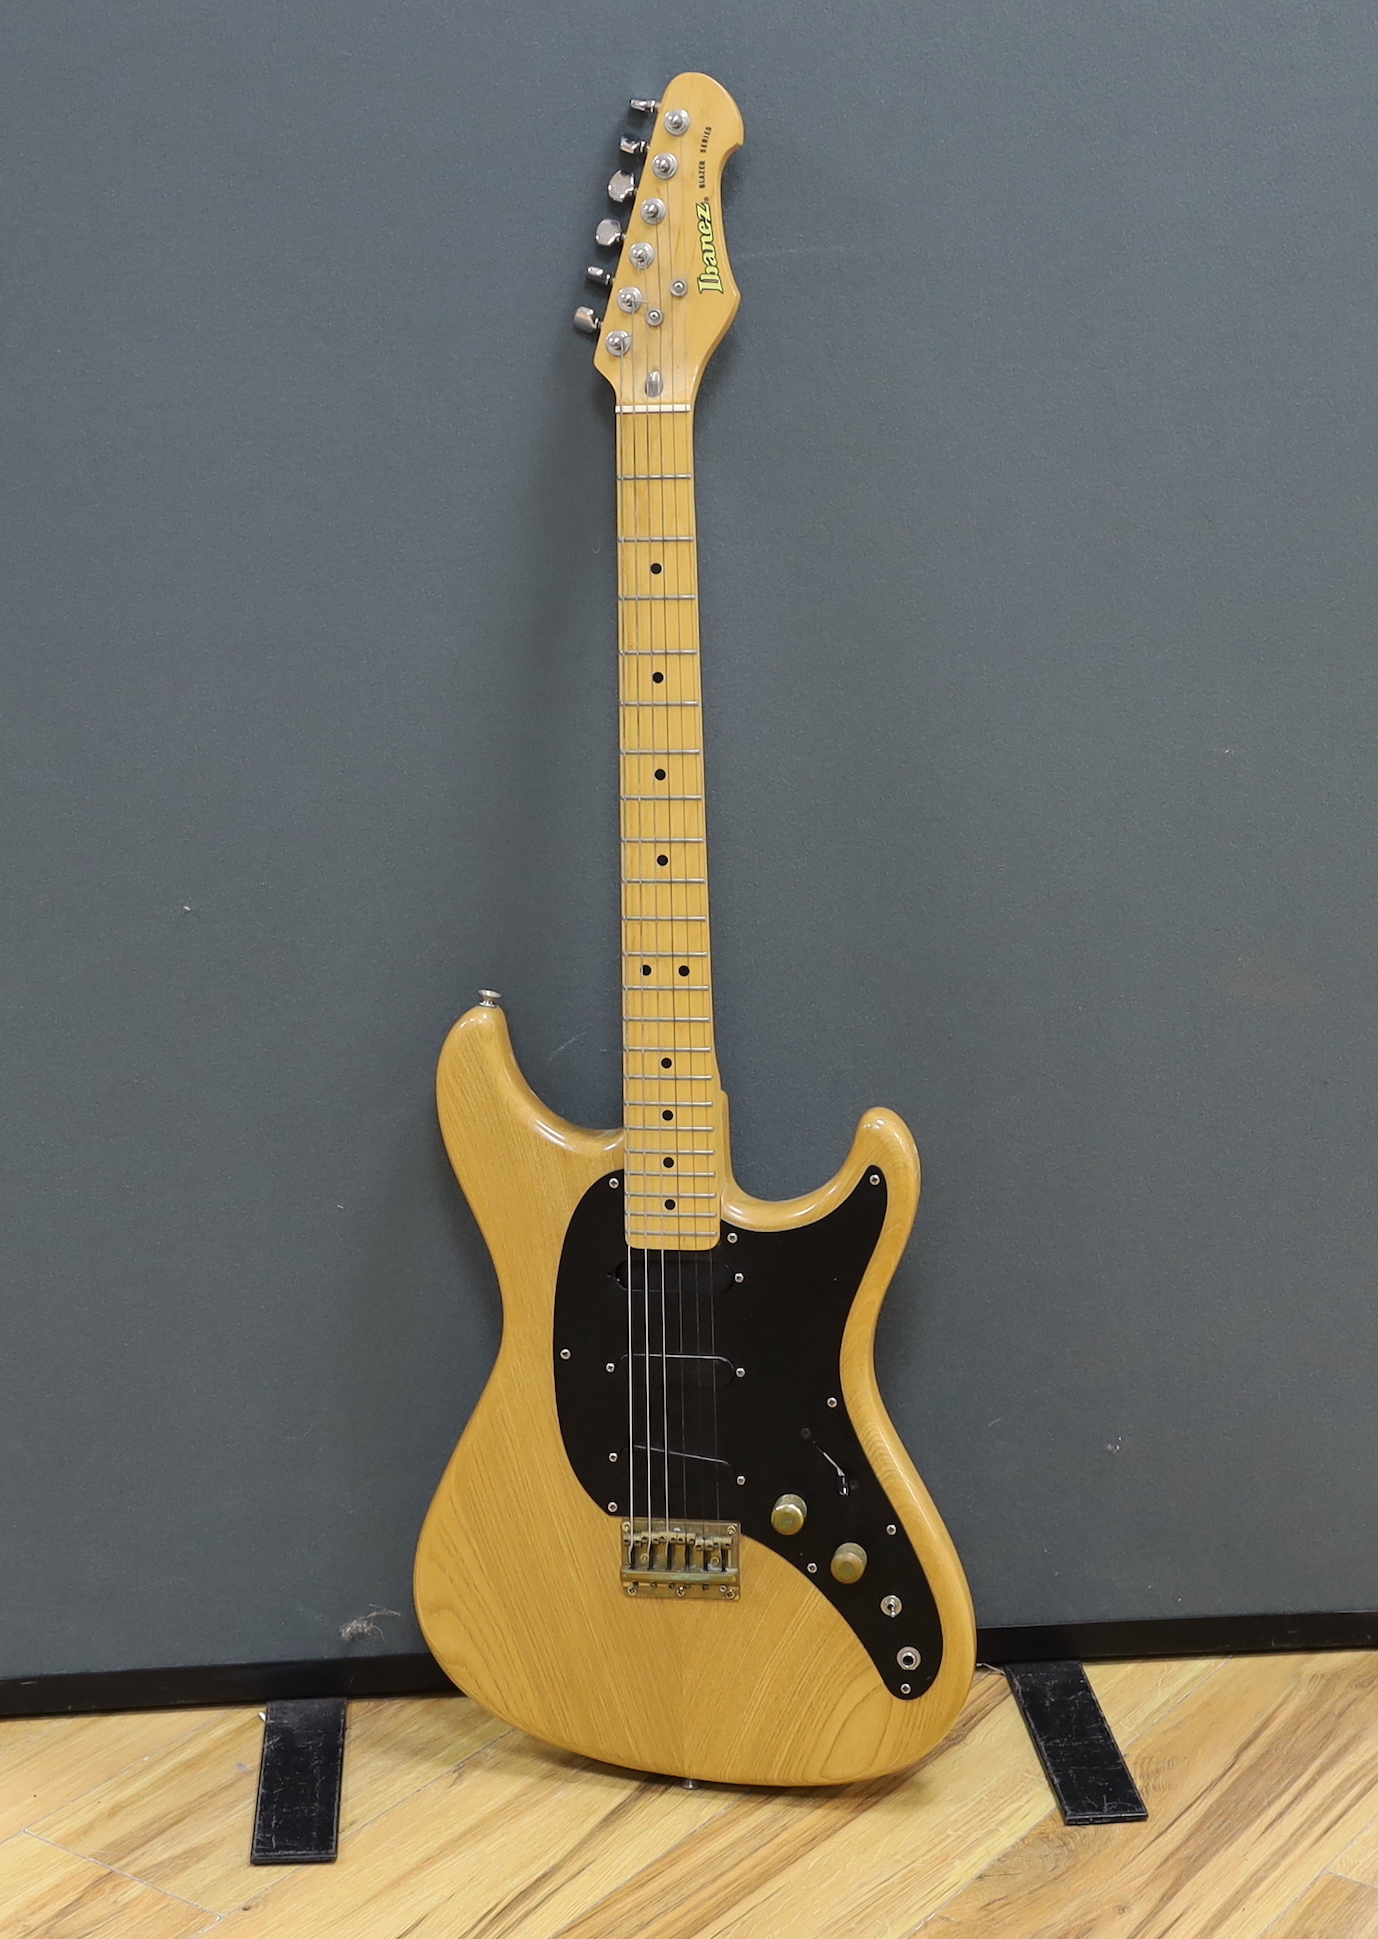 A 1980 Electric guitar by Ibanez, Japan, Blazer Series in natural finish with flight case and a small Fender Frontman 15G amp